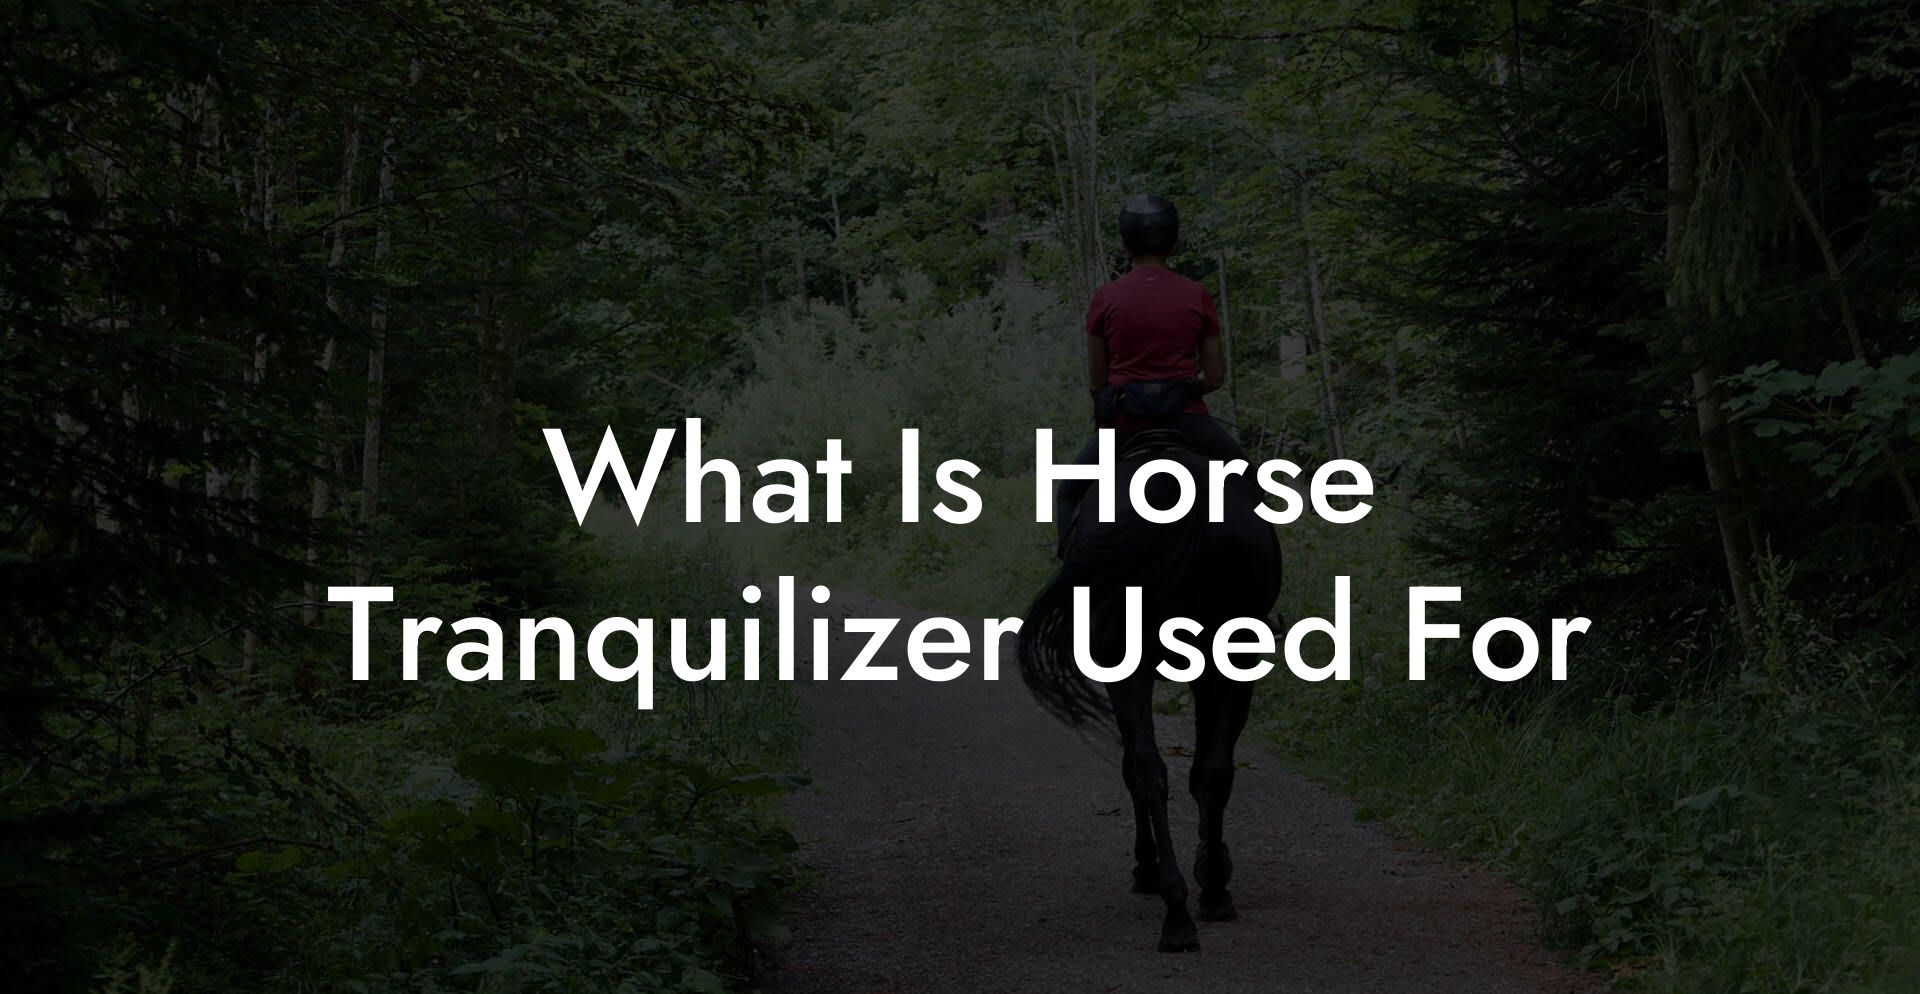 What Is Horse Tranquilizer Used For